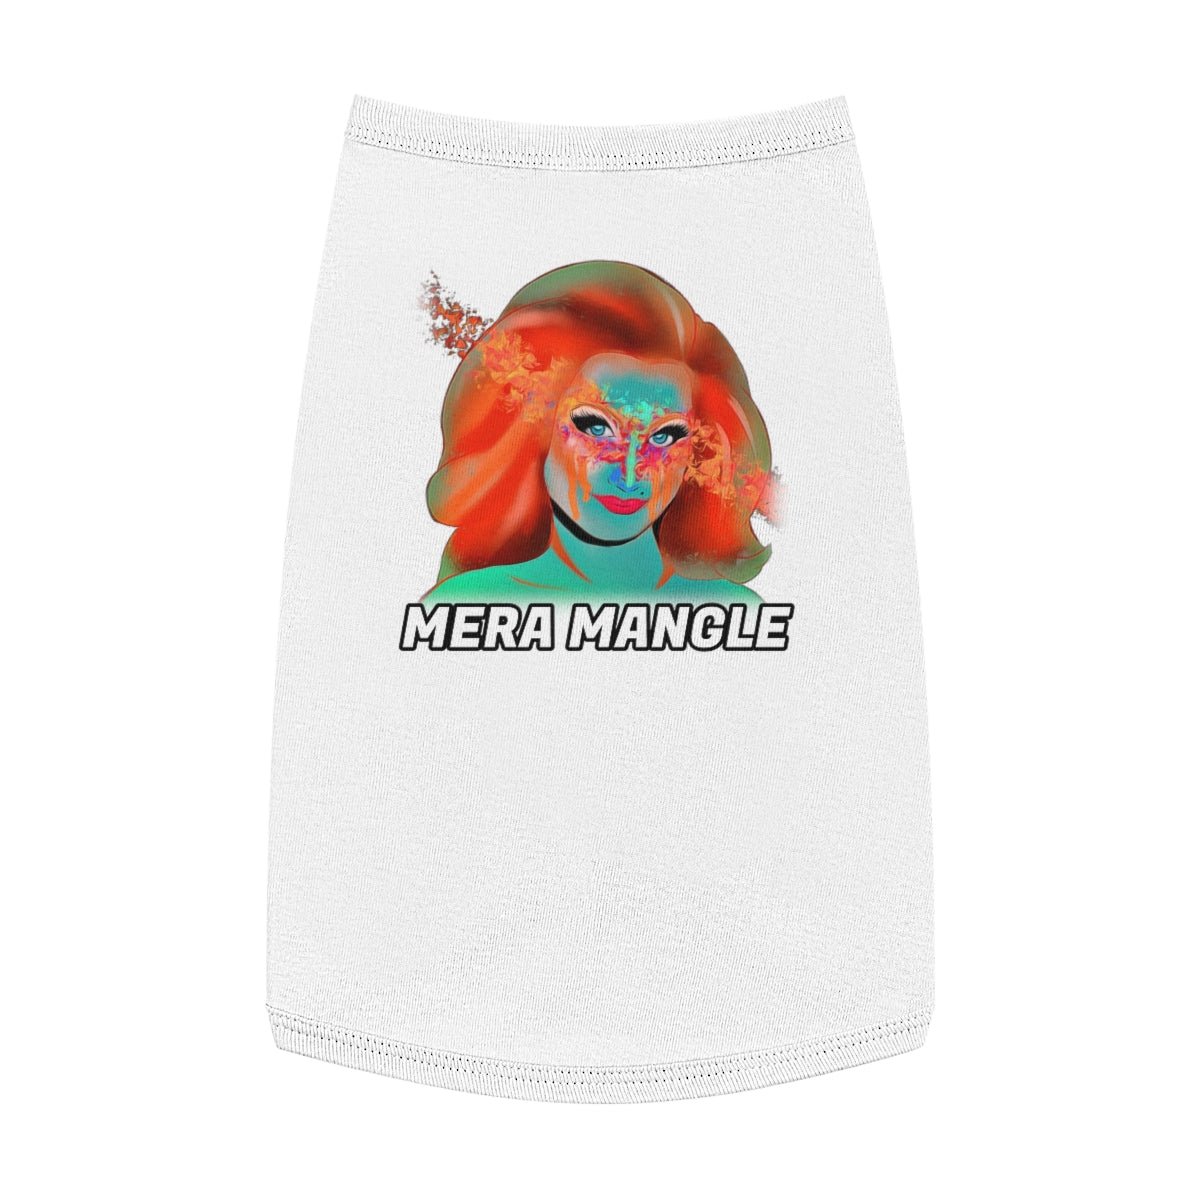 Mera Mangle - Colorful Pet Tank Top - dragqueenmerch